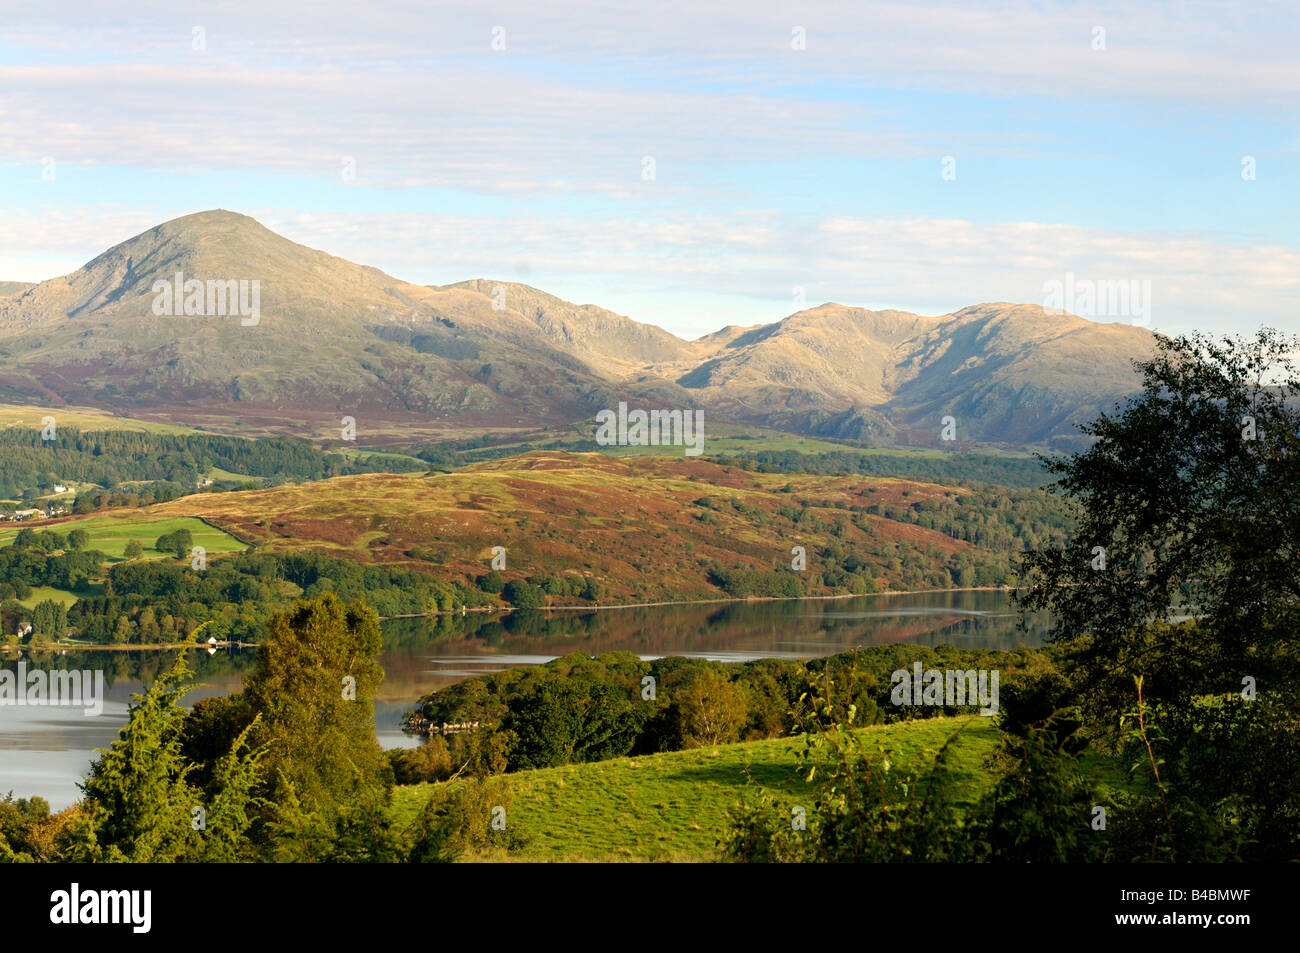 A scenic view of Coniston Water, The Old Man of Coniston and the Coniston fells Stock Photo